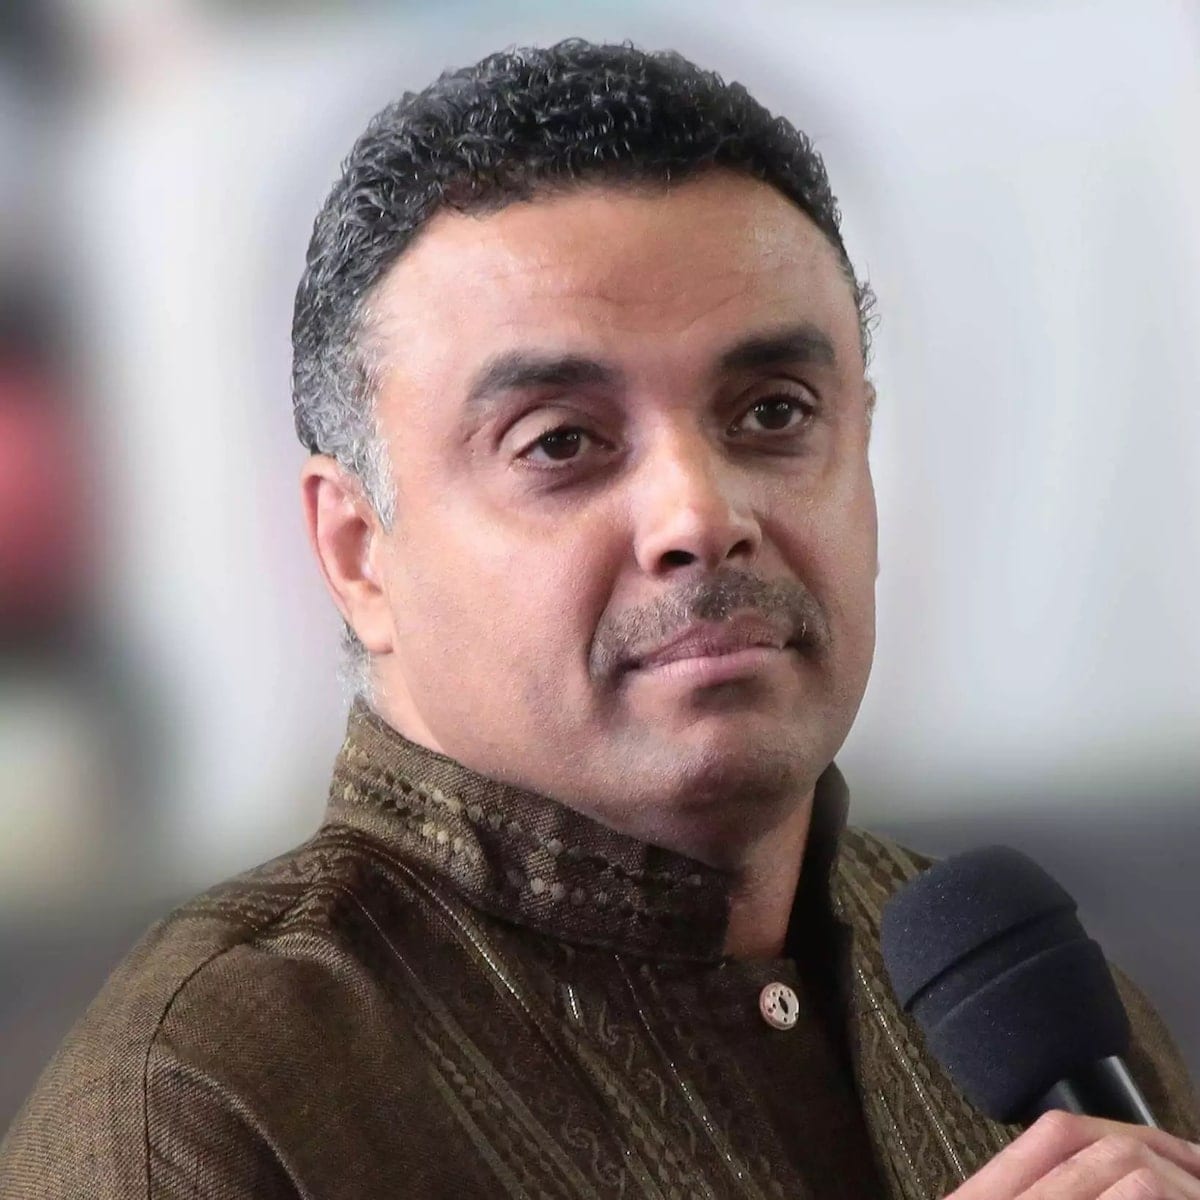 Video: “We prophesied COVID-19, gave wisdom” but “ignoramuses” spoke ignorantly; “I said close borders but they didn’t listen”  – Bishop Dag Heward-Mills